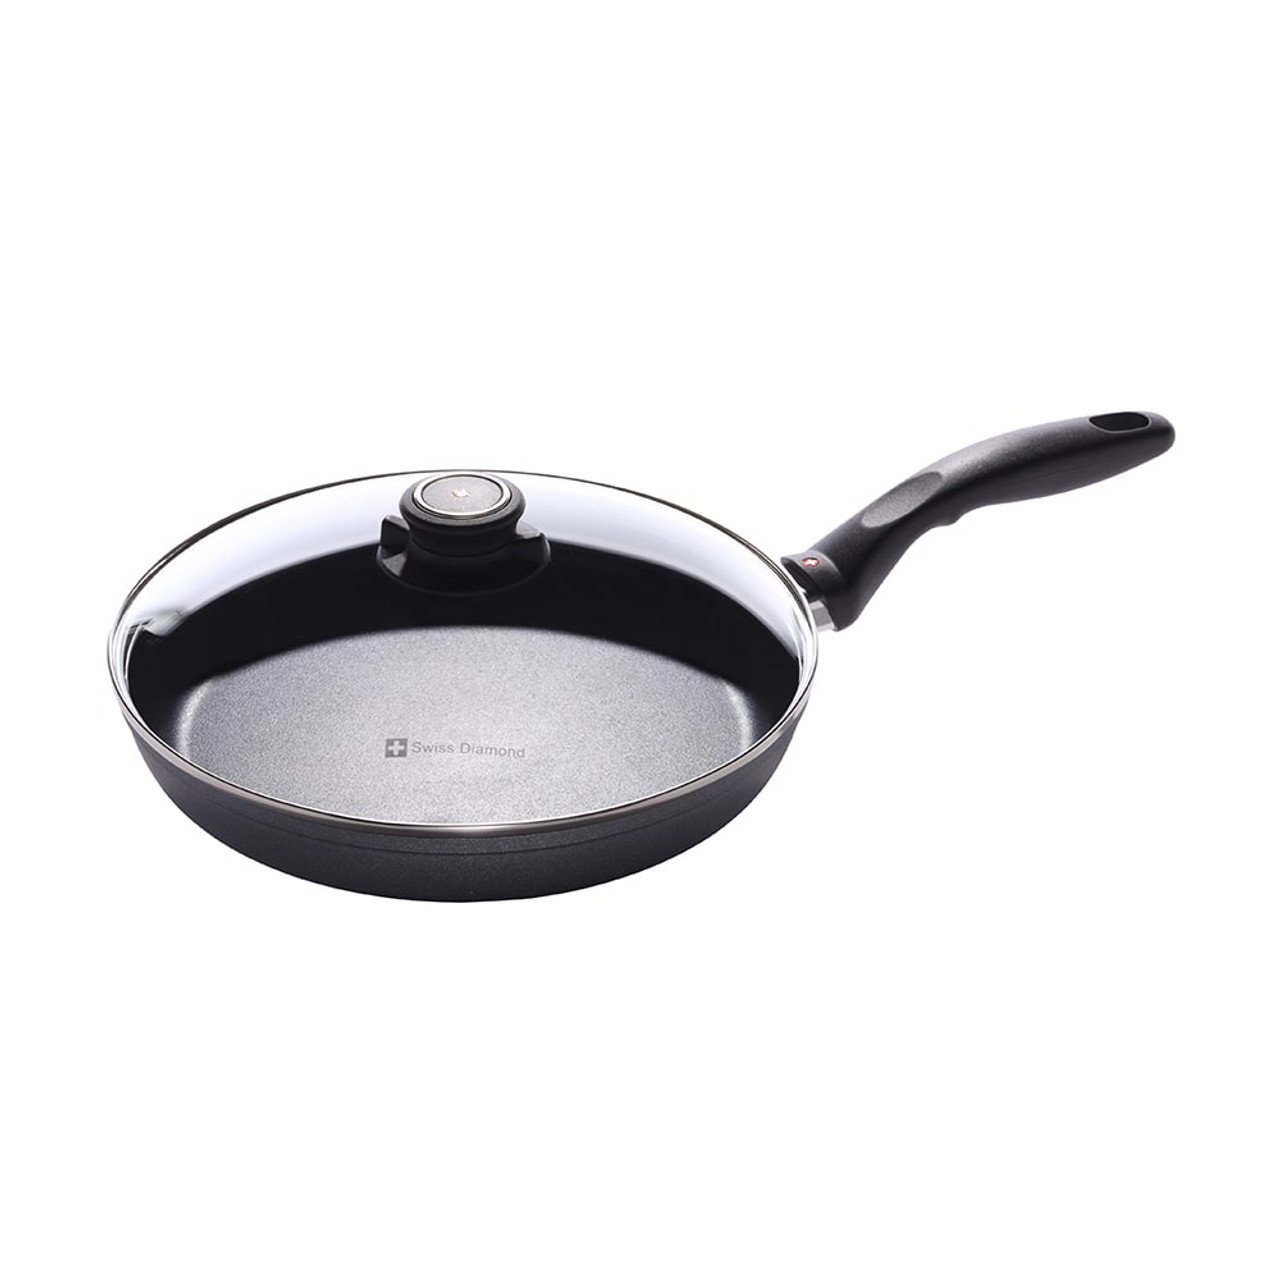 https://cdn11.bigcommerce.com/s-hccytny0od/images/stencil/1280x1280/products/443/2645/swiss-diamond-nonstick-fry-pan-with-lid-10-inch__97778.1597356558.jpg?c=2?imbypass=on